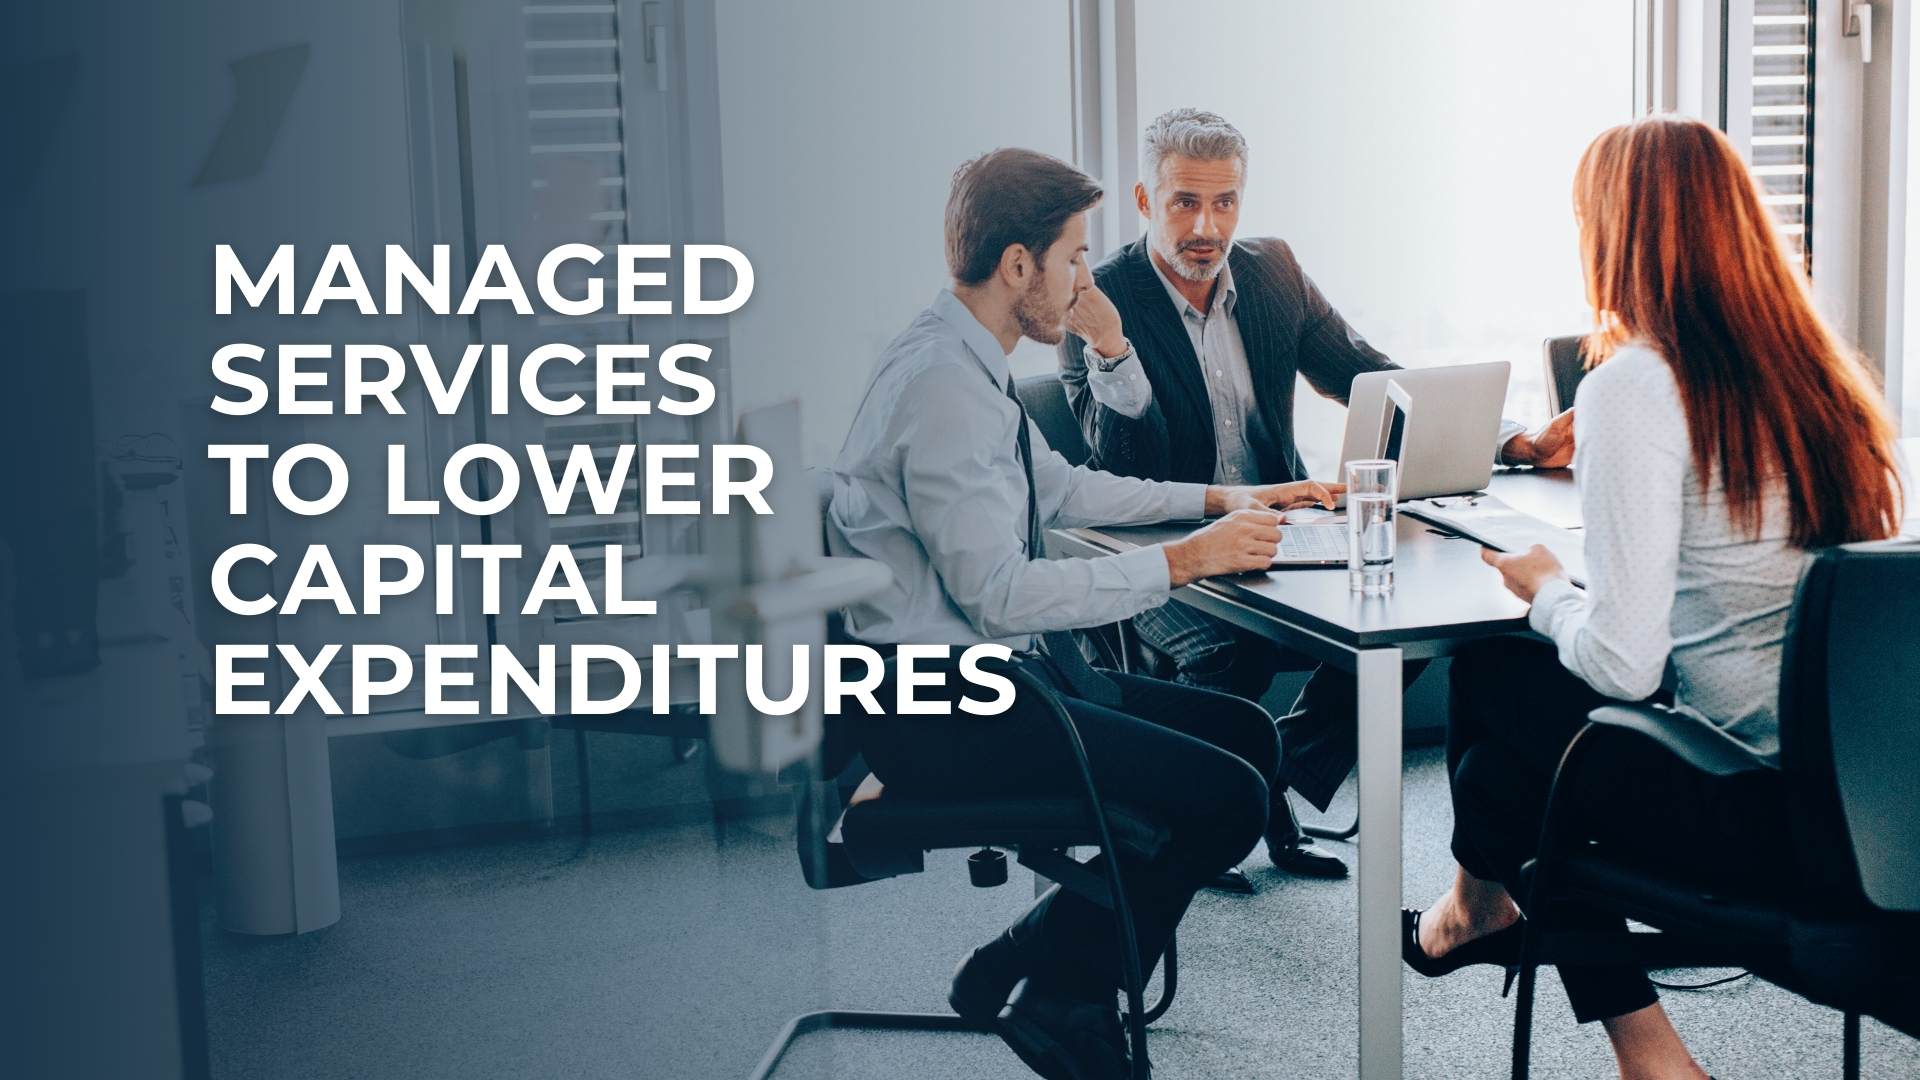 Managed Services to Lower Capital Expenditures